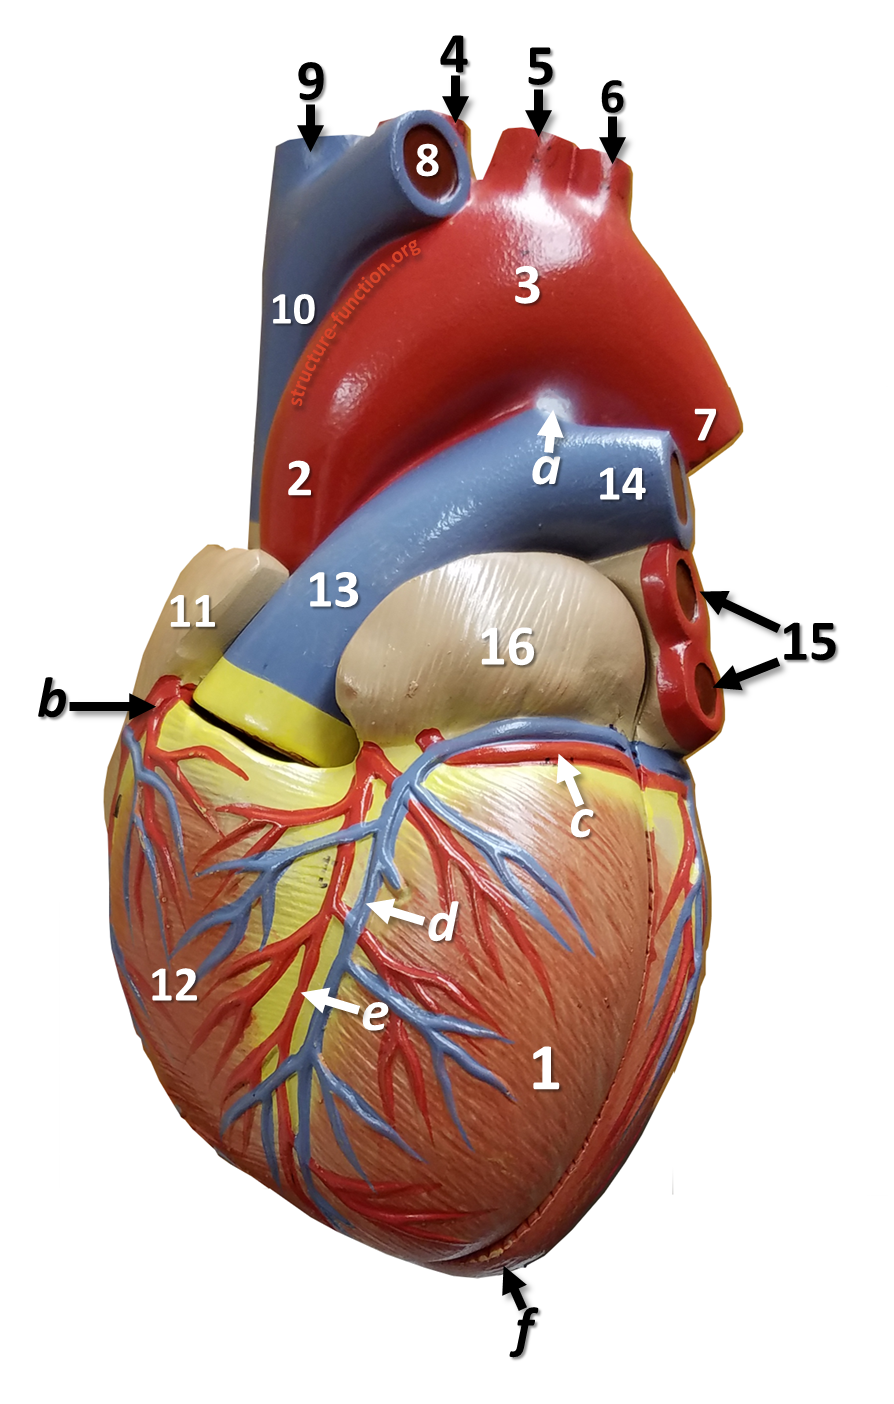 Anterior view of an anatomy heart model with structures labeled by letters and numbers